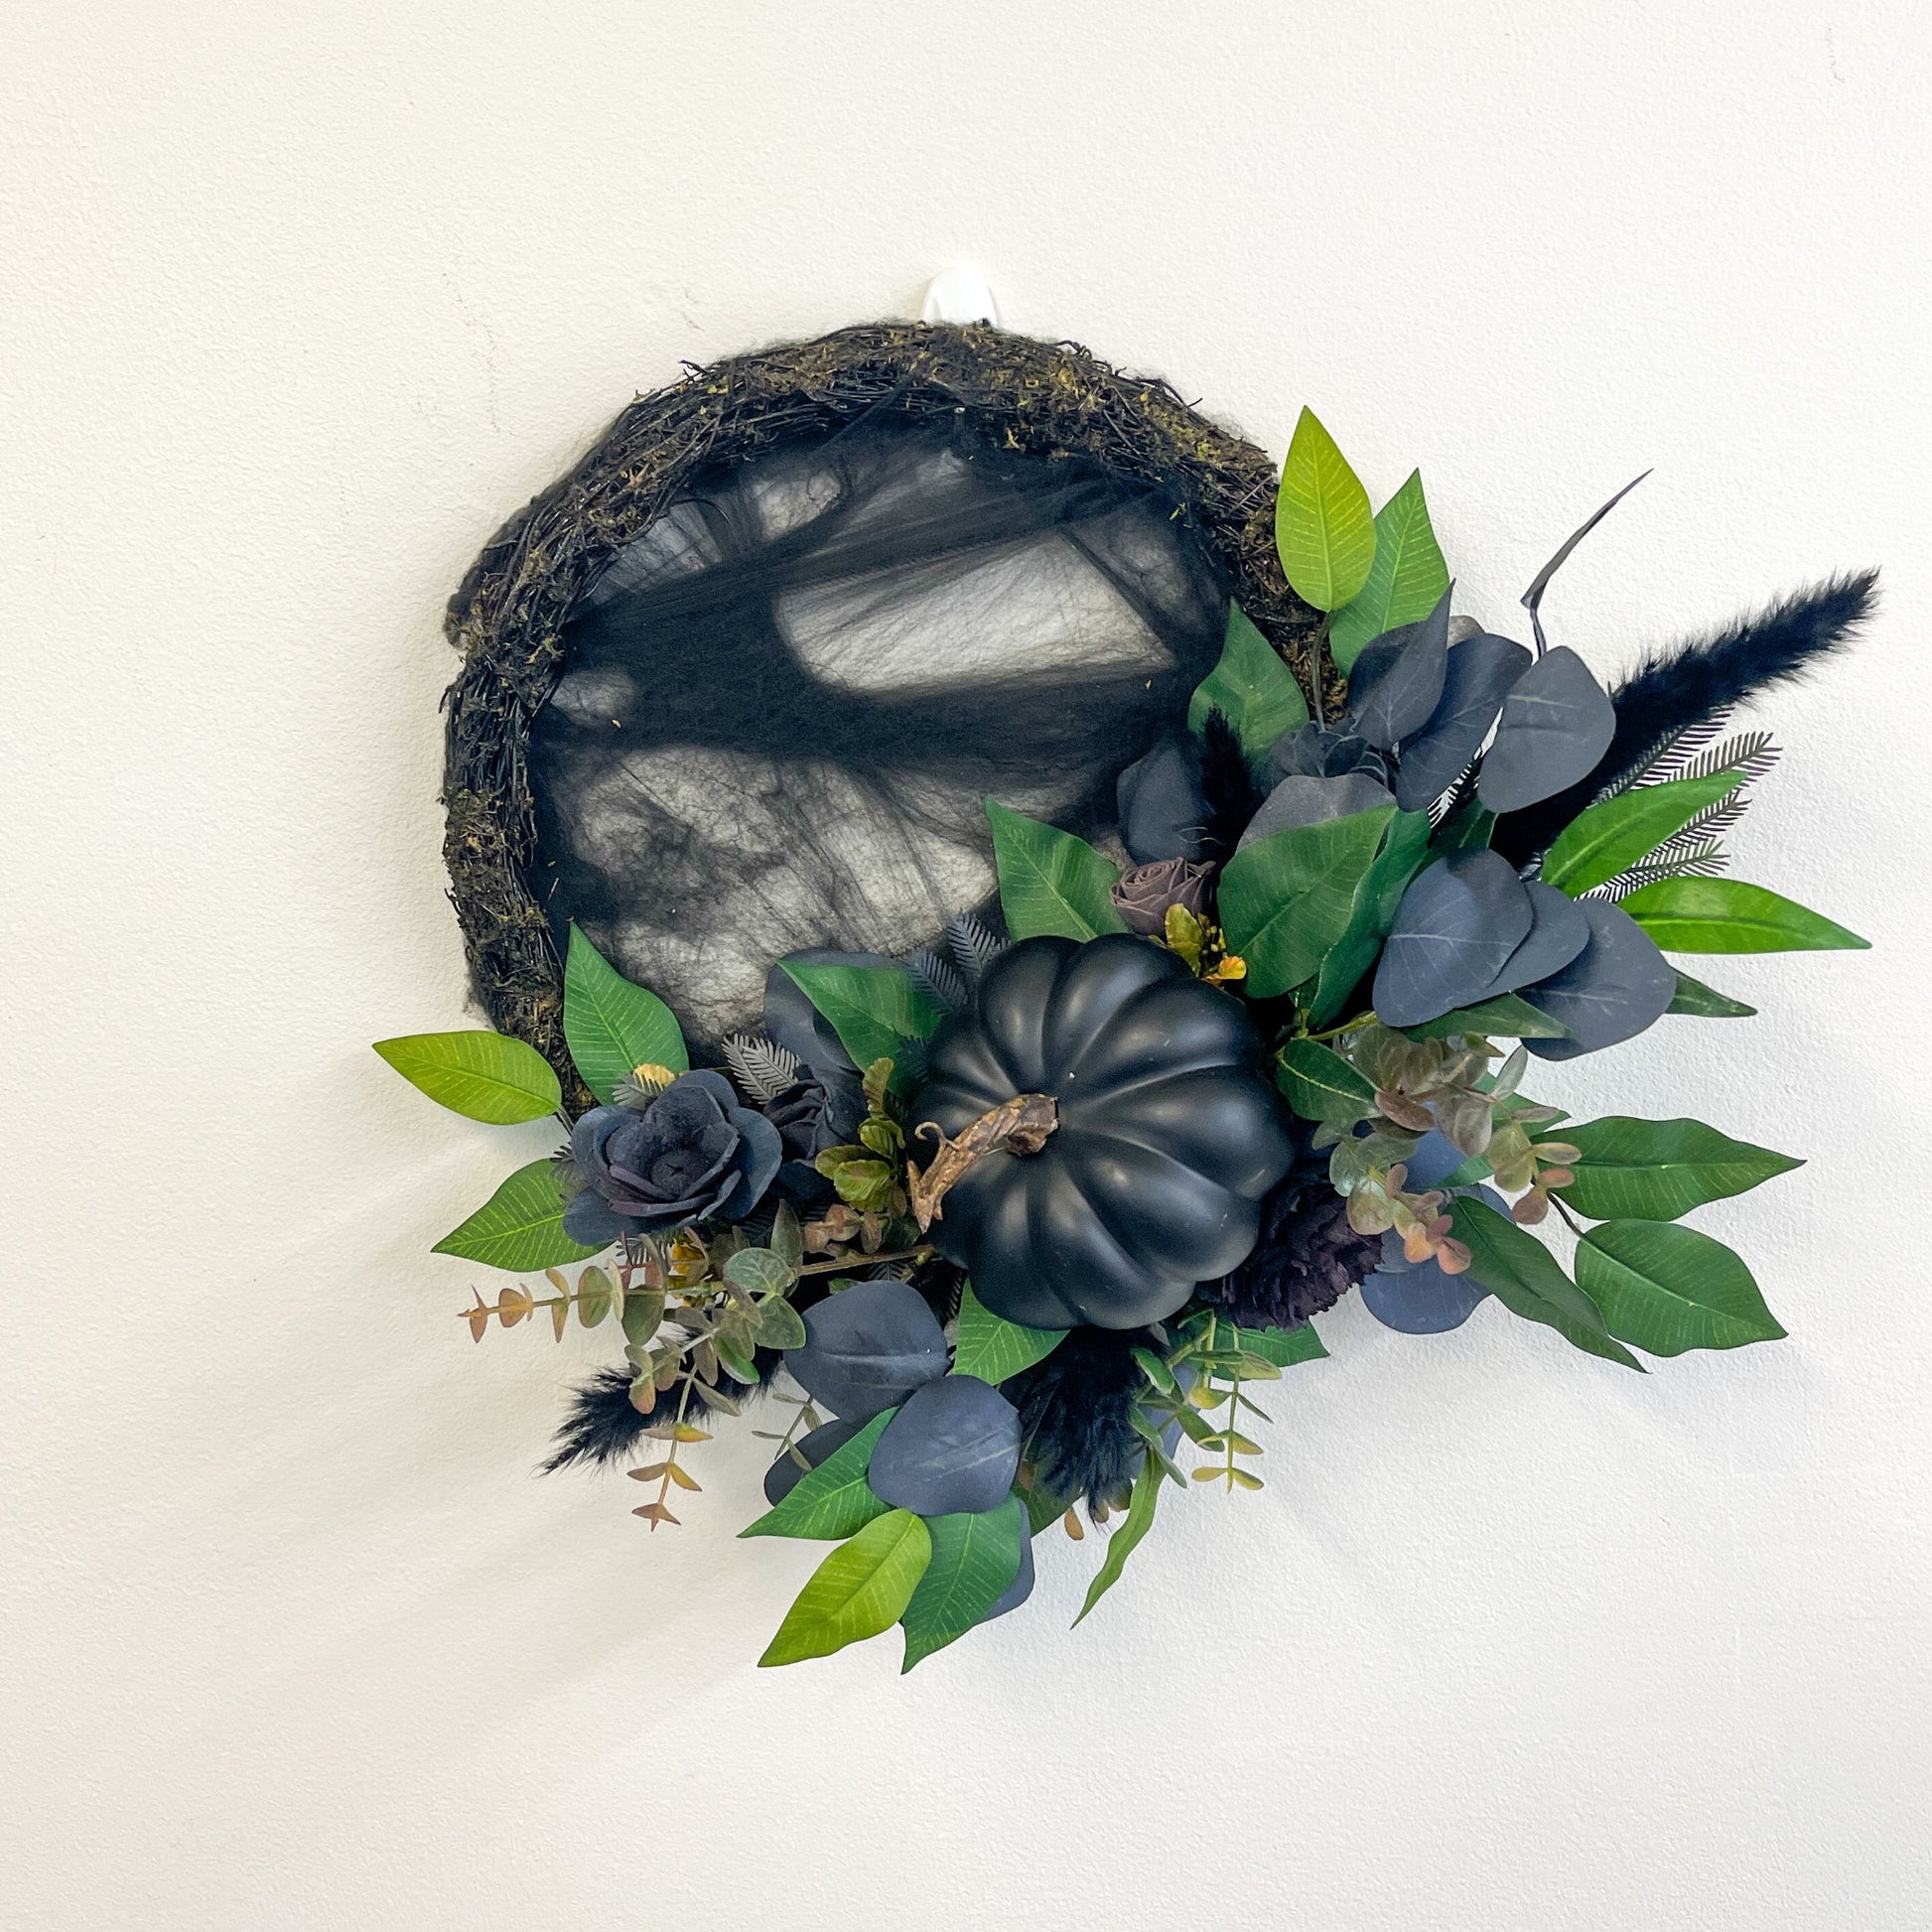 Black wooden flower wreath with black cobwebs. flowers, pumpkin and incorporated greenery.